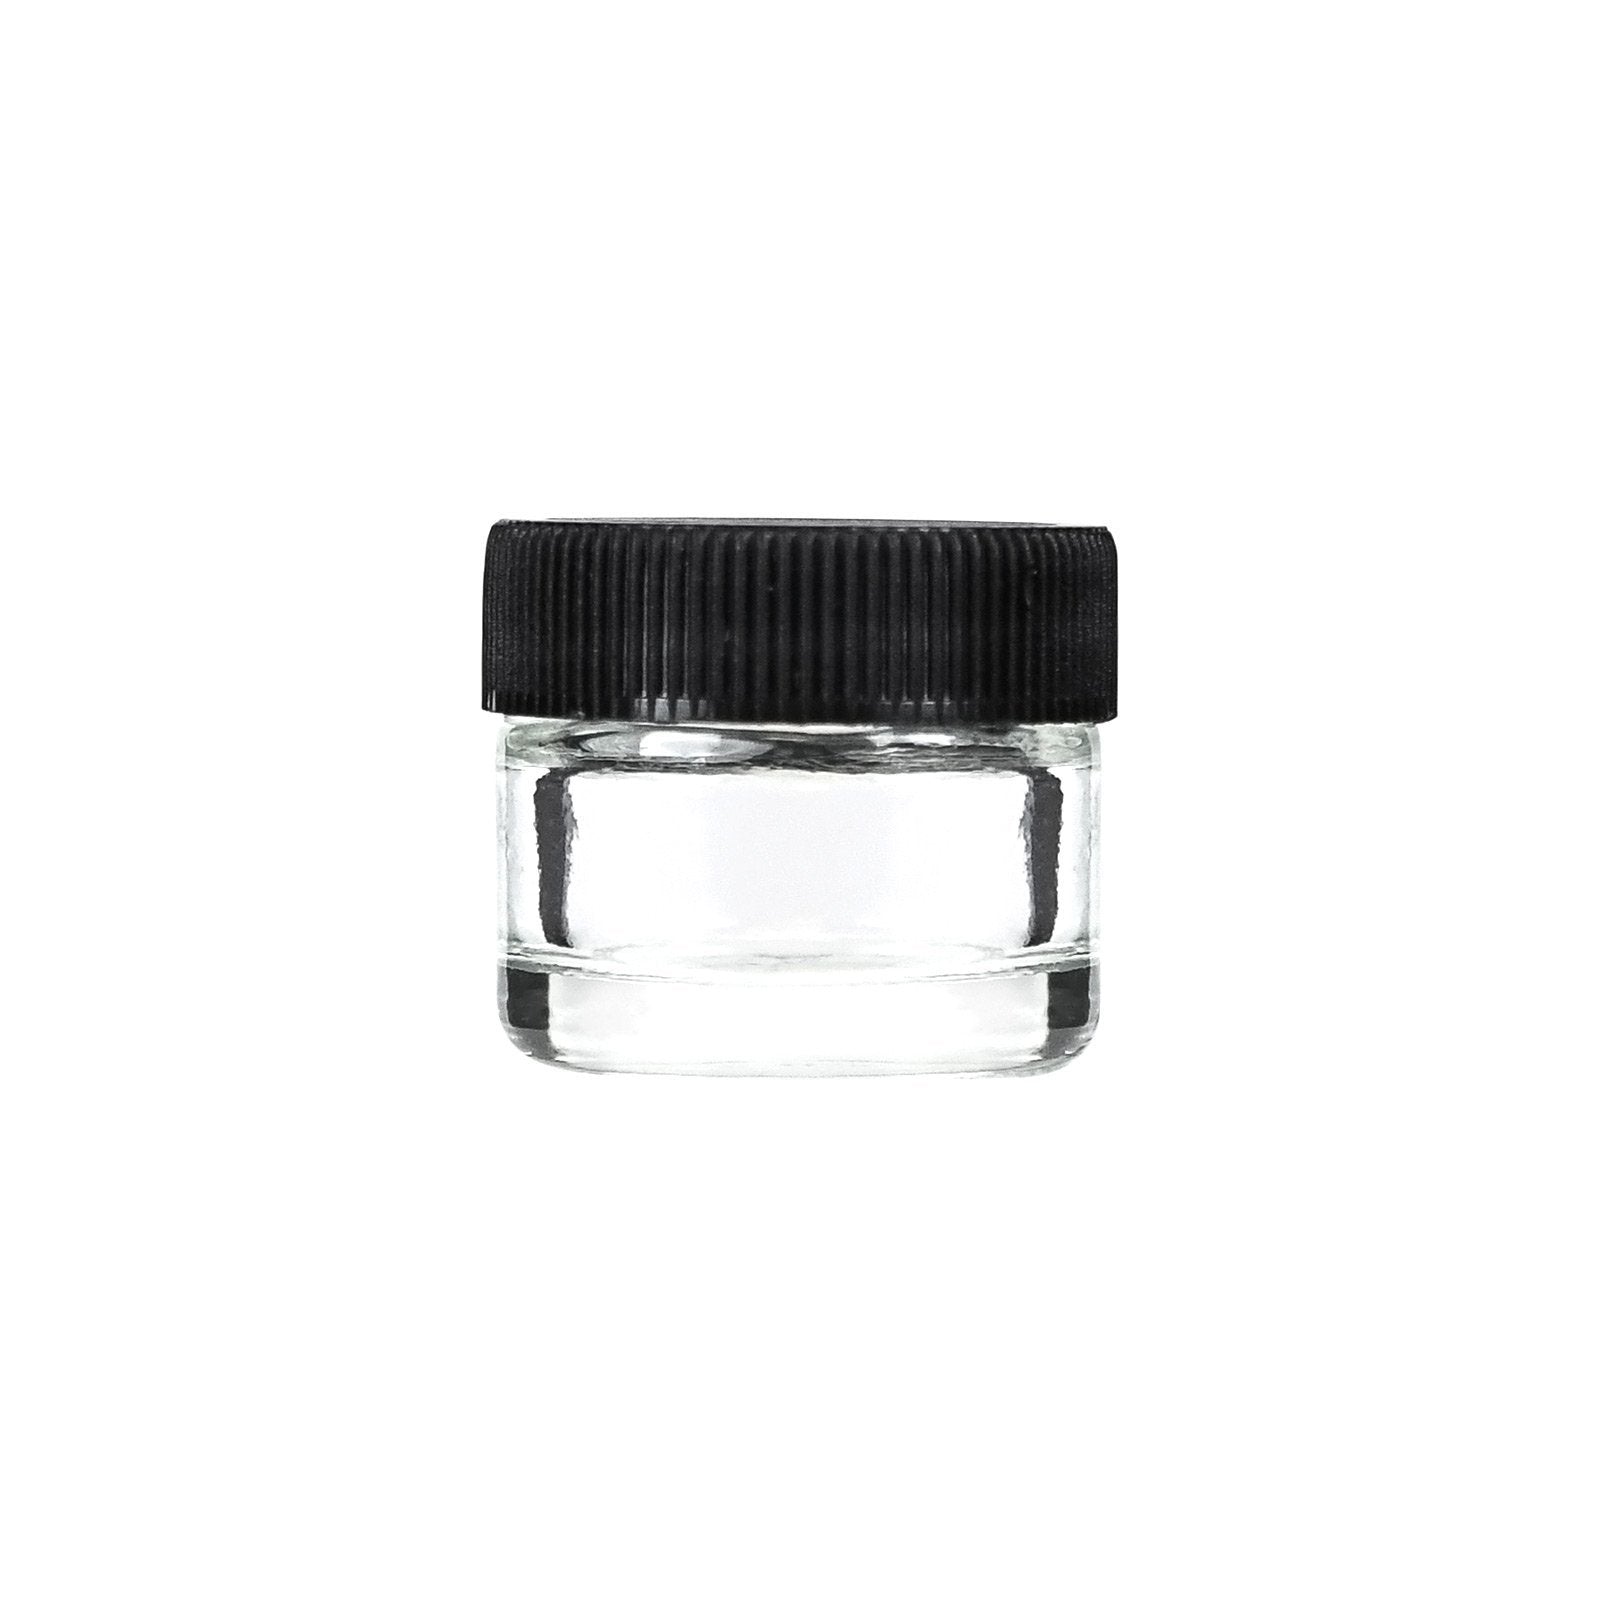  5ML Glass Screw Top Concentrate Container Black Cap - 1 Gram Dab at Fllower Power Packages